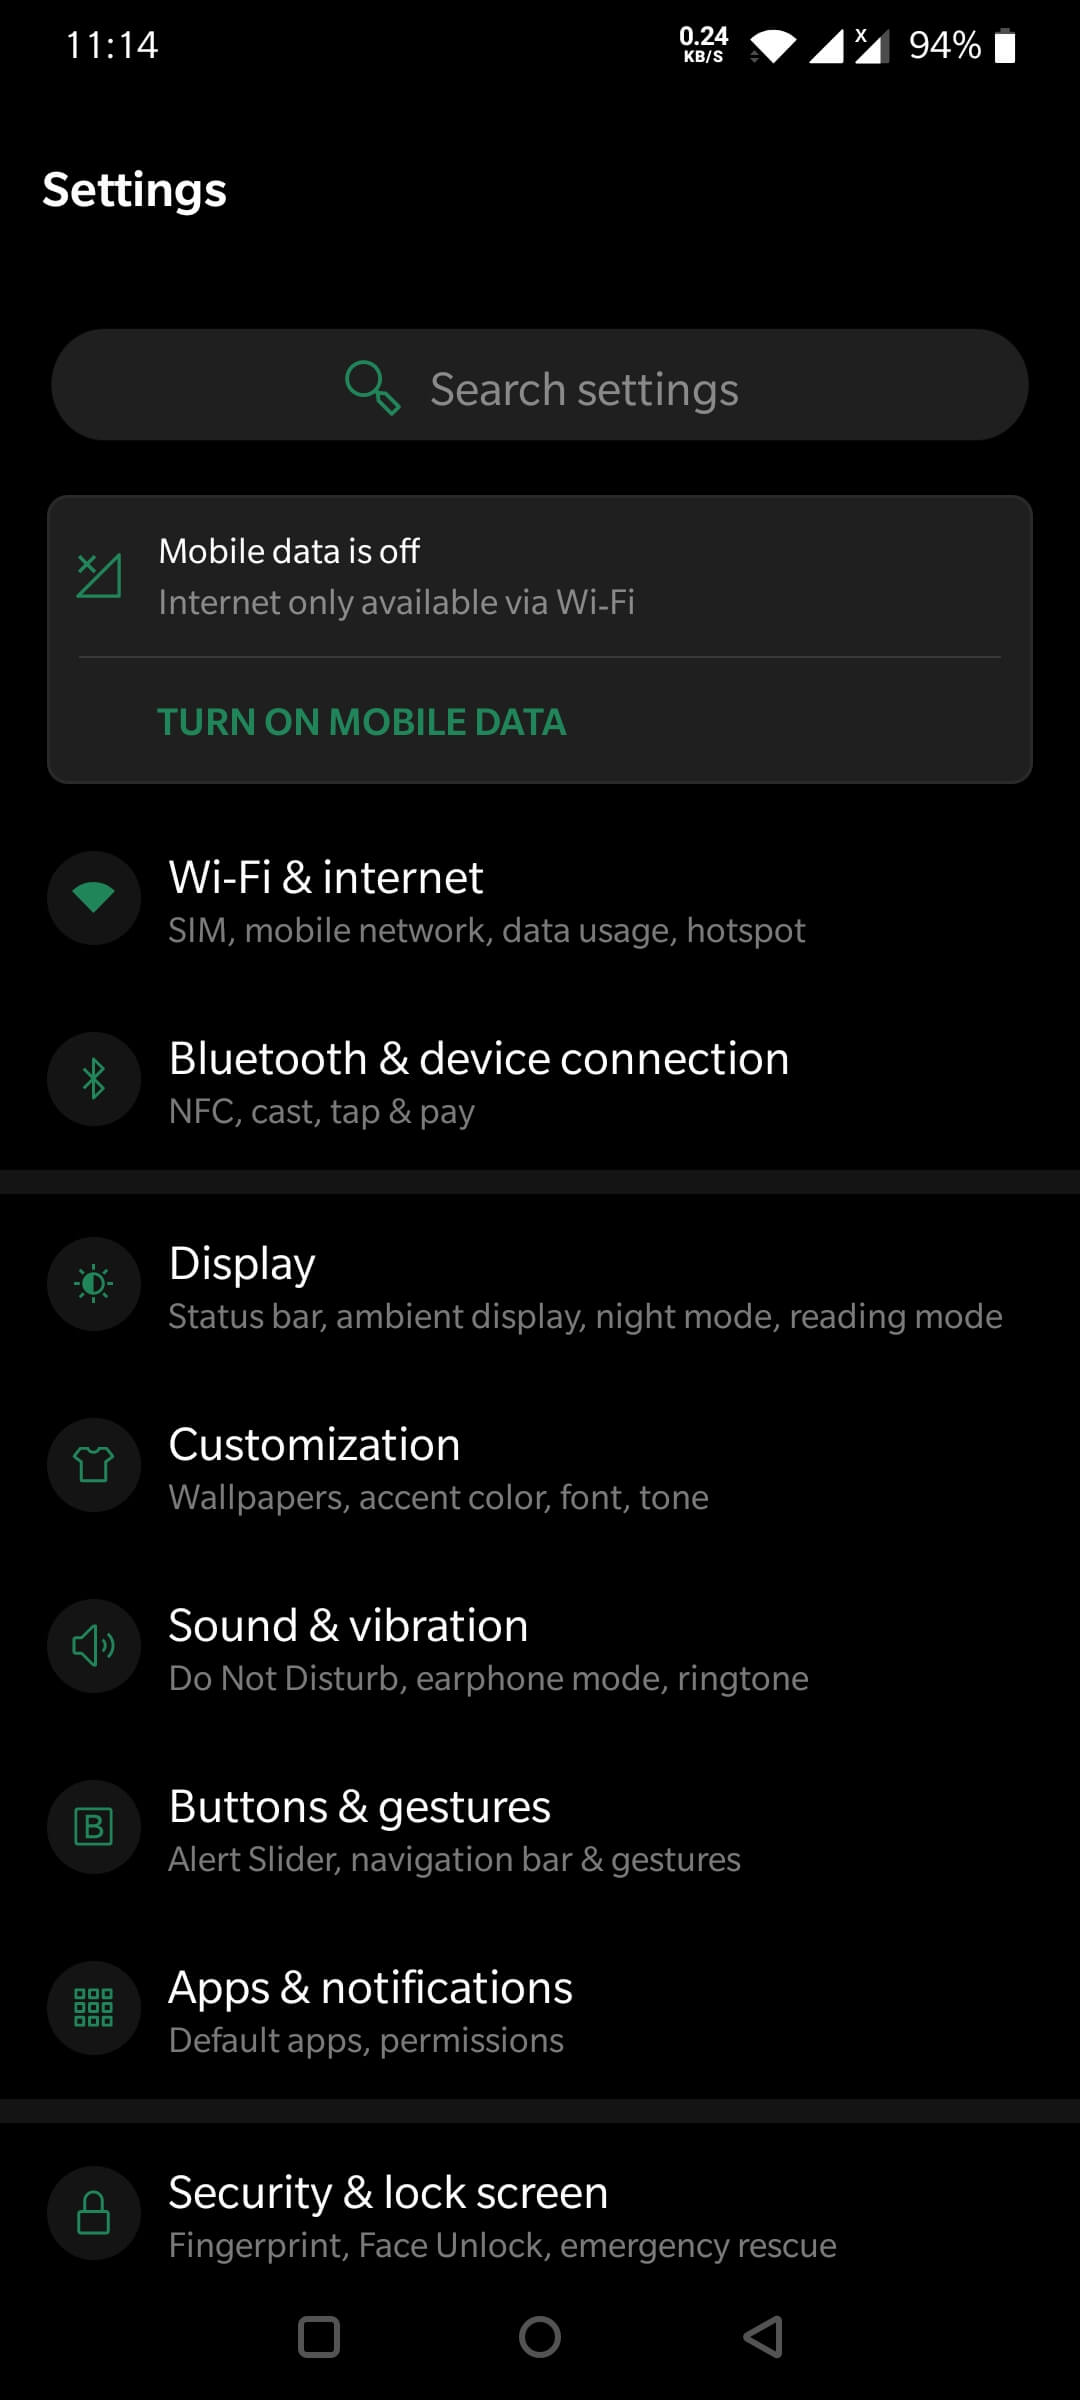 Open the Settings on your Android device.
Select Wi-Fi or Network & Internet from the menu.